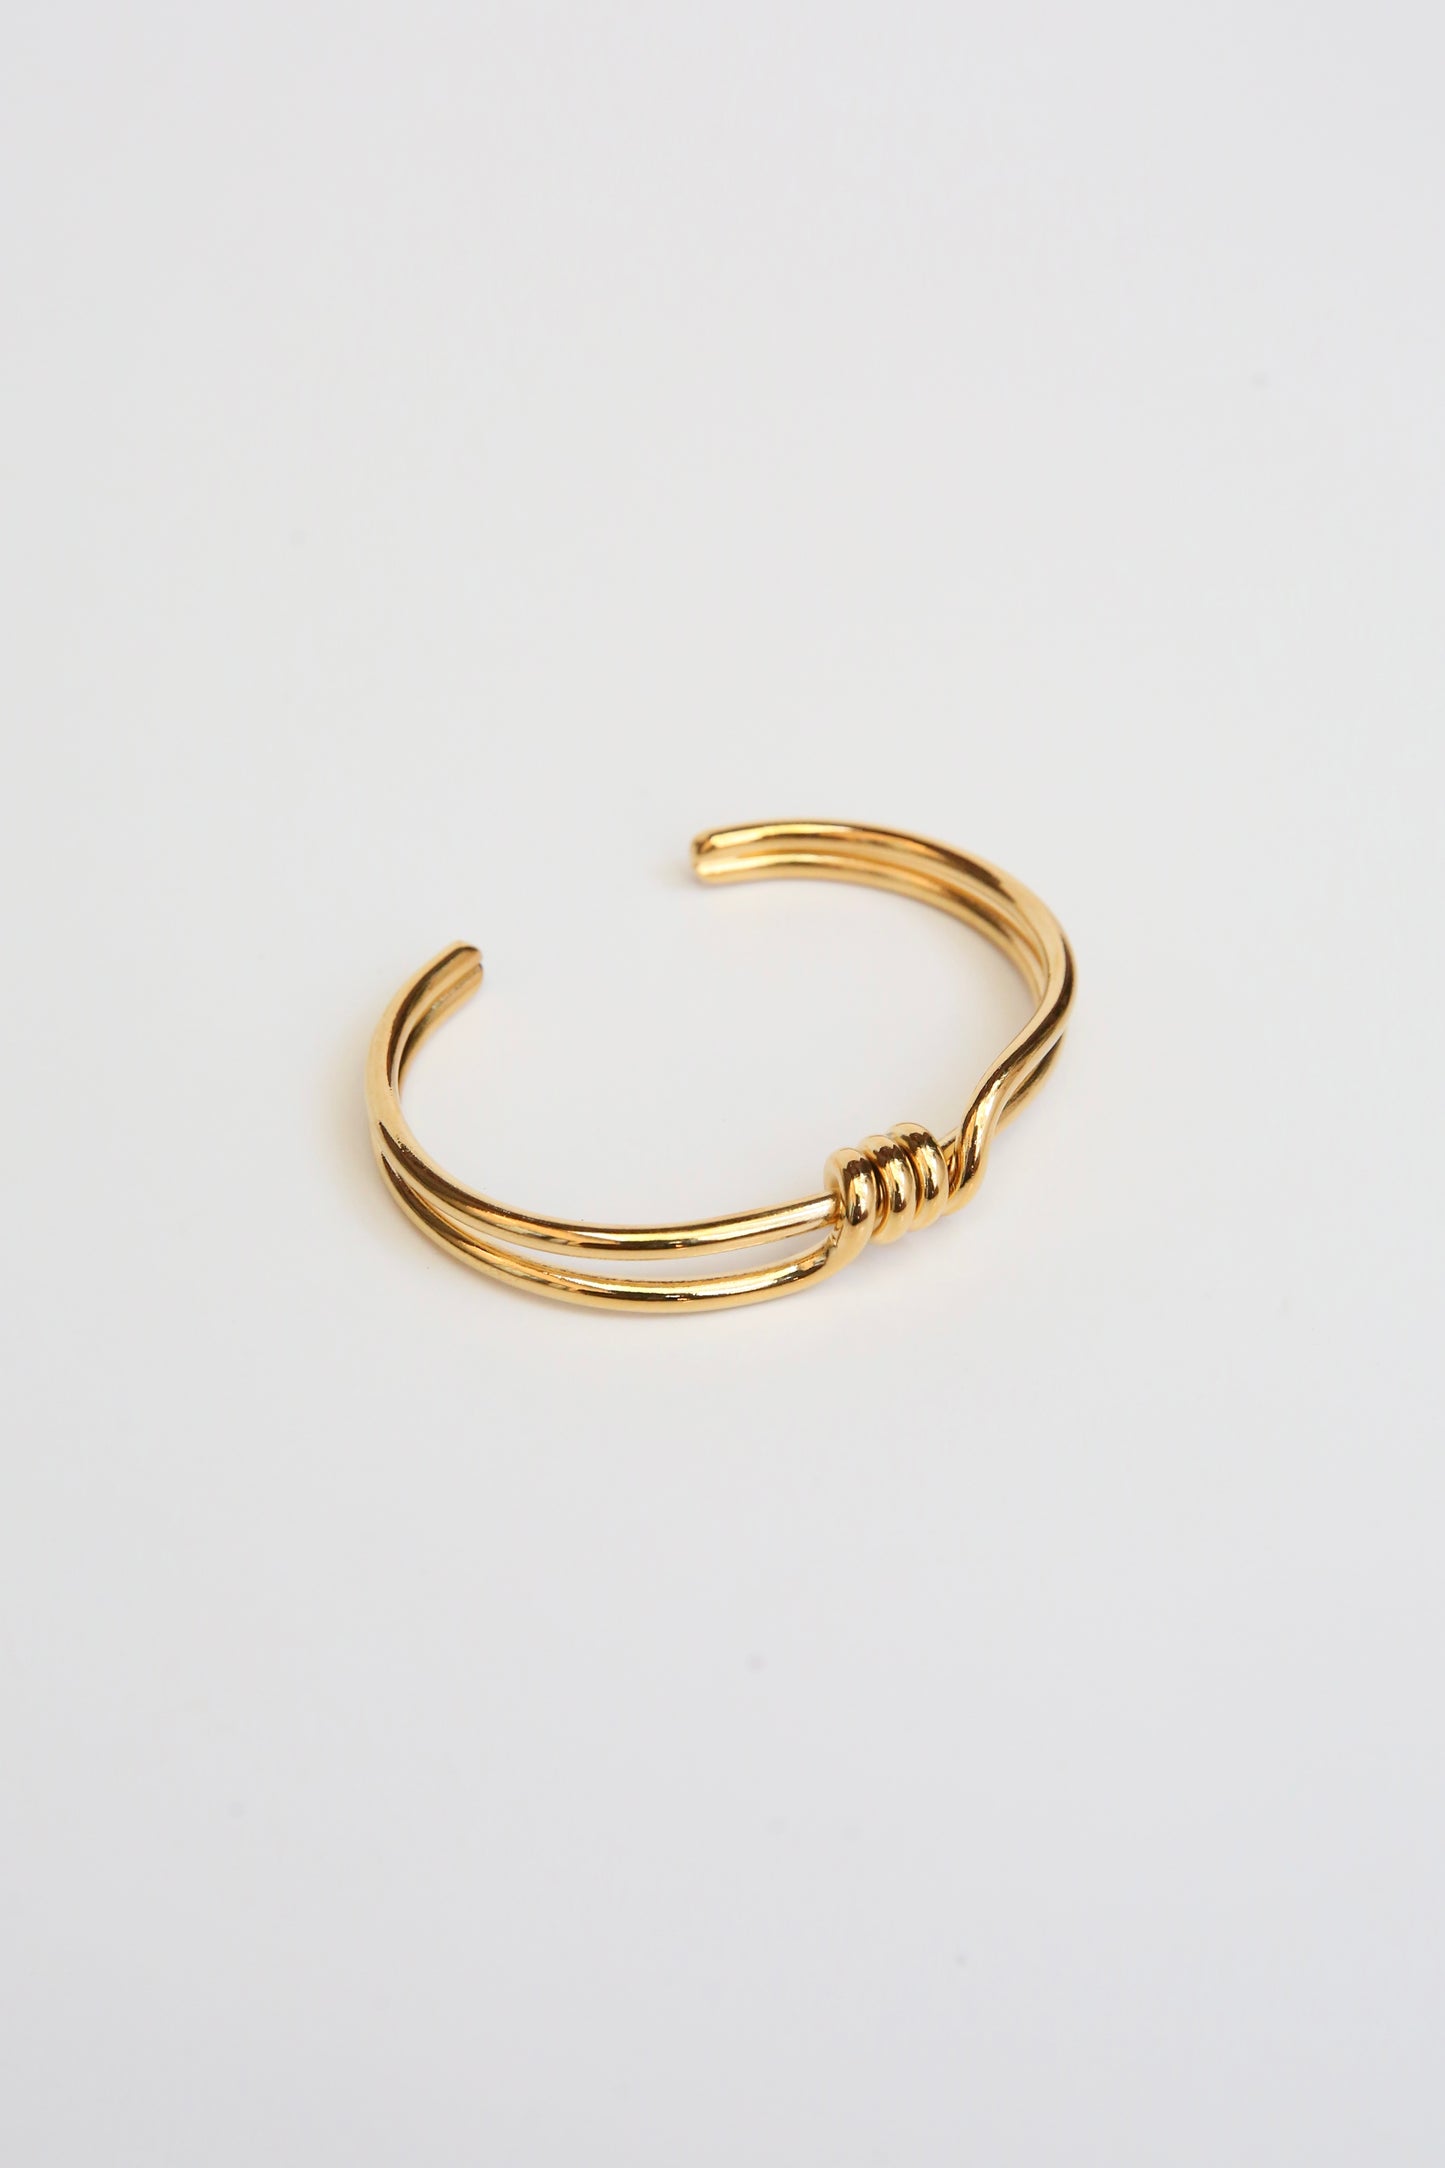 Two banded Gold surrounded bracelet with a front wrap around detail on a white background